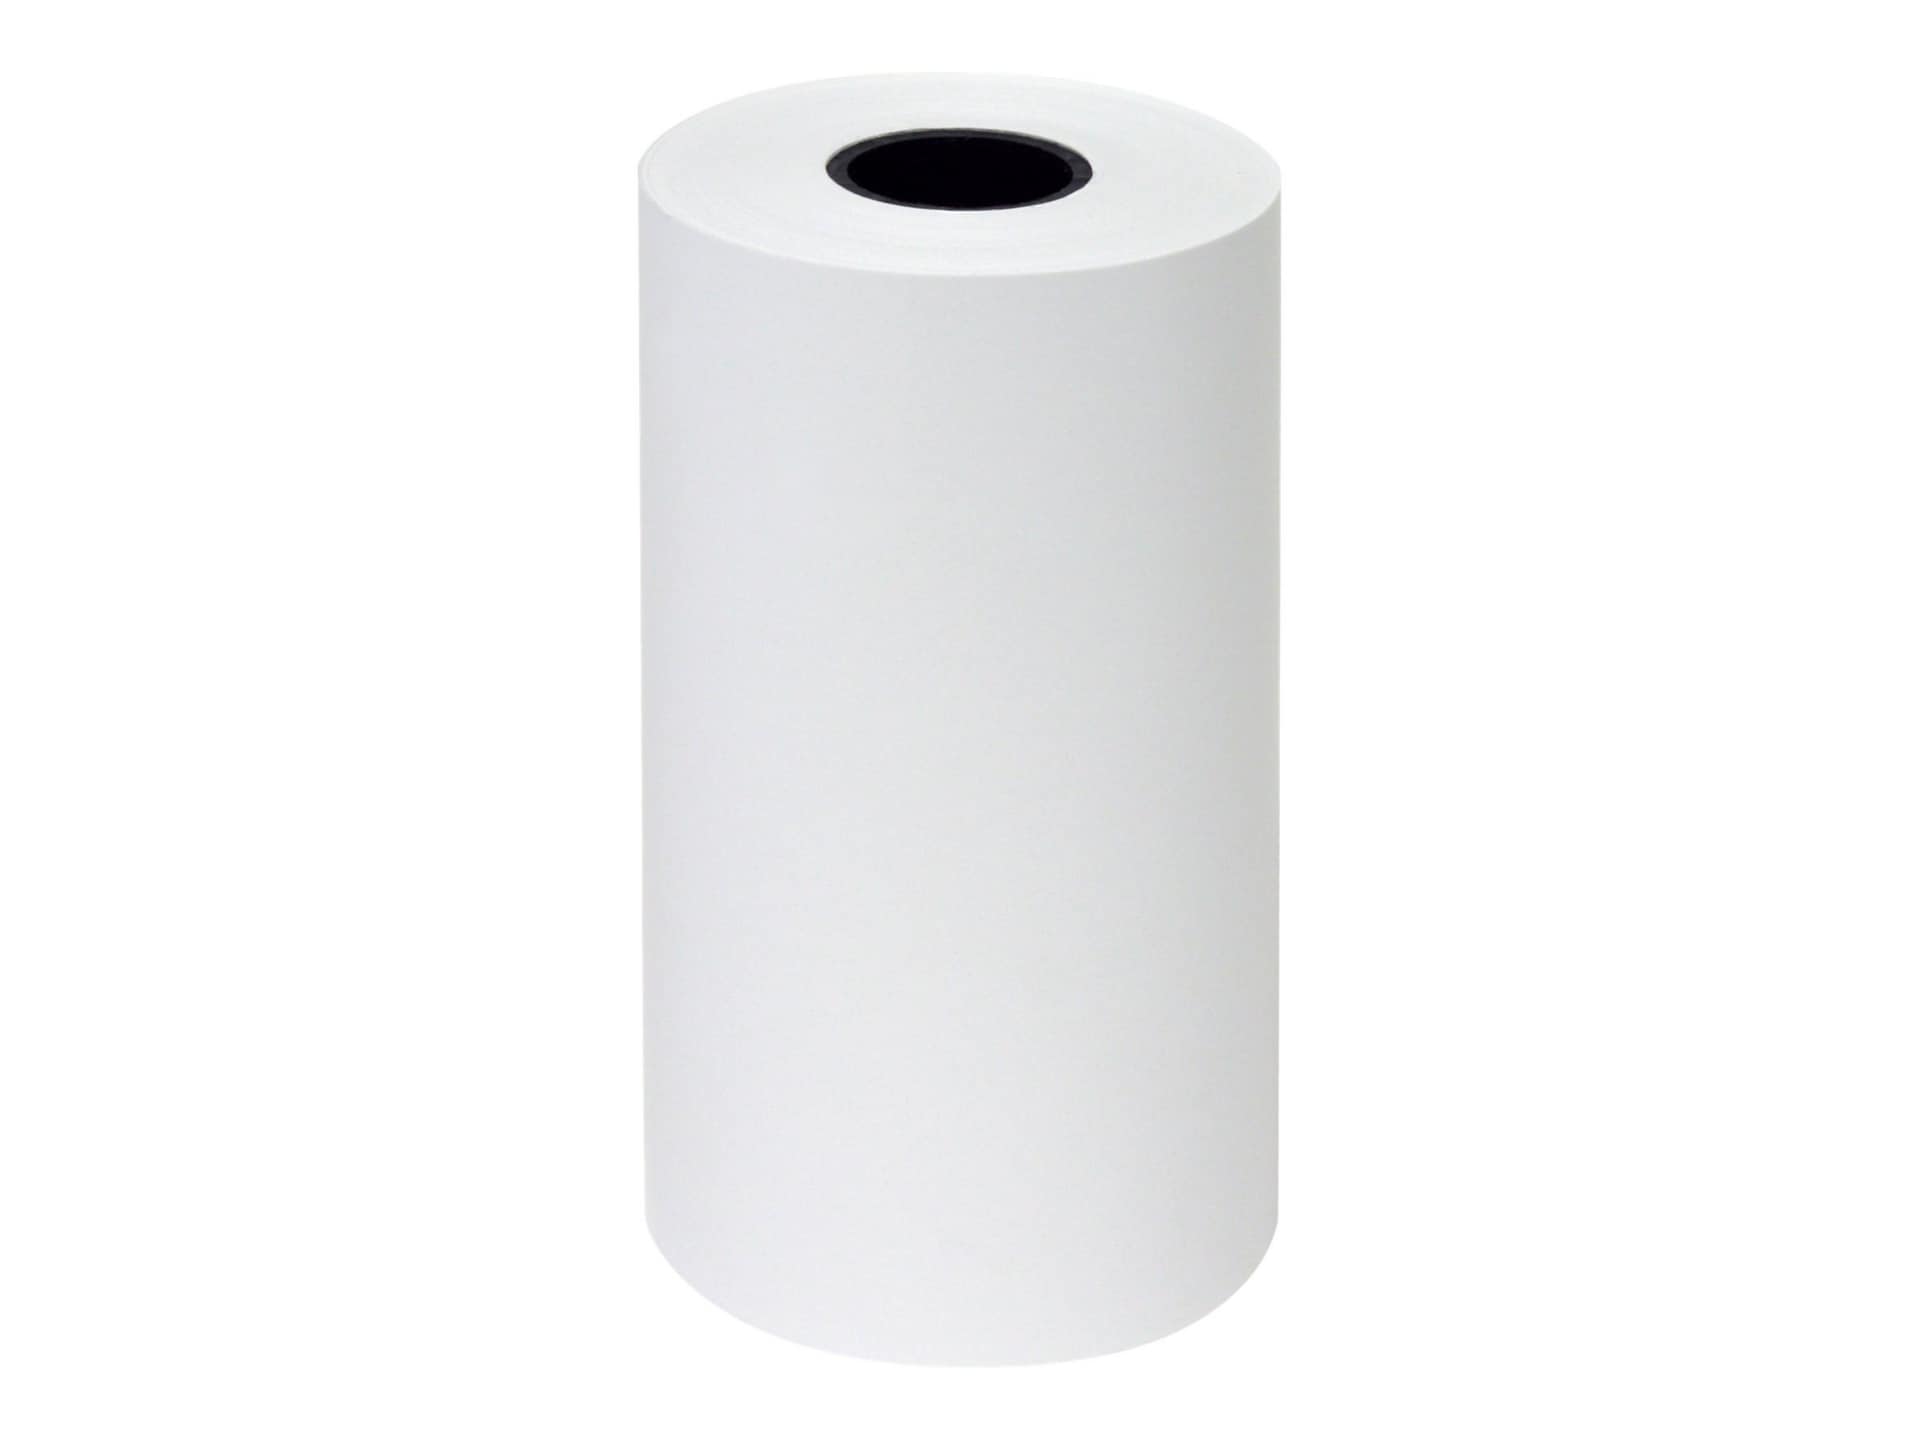 Brother RD002U5M Premium - paper - 36 roll(s) - Roll (4 in x 90 ft)